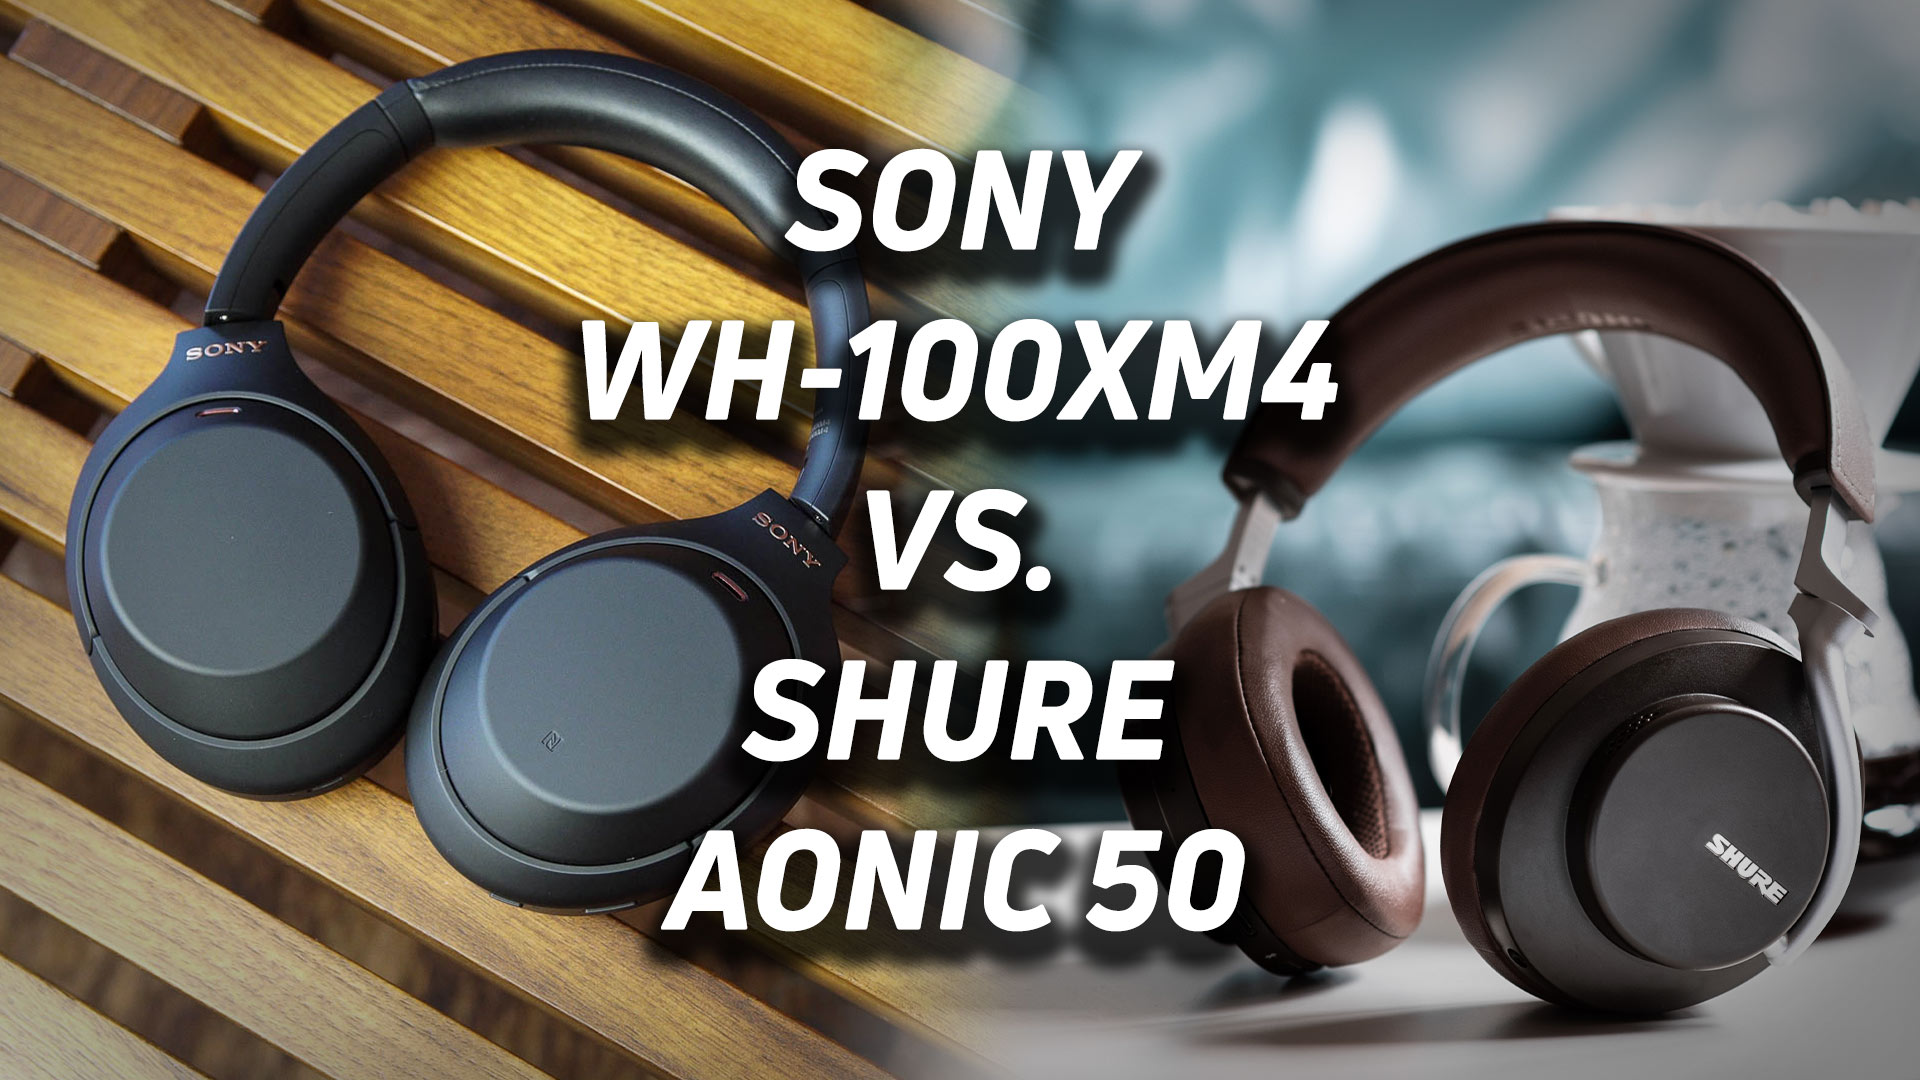 A blended image of the Shure AONIC 50 vs Sony WH-1000XM4 with the respective text overlaid atop it.